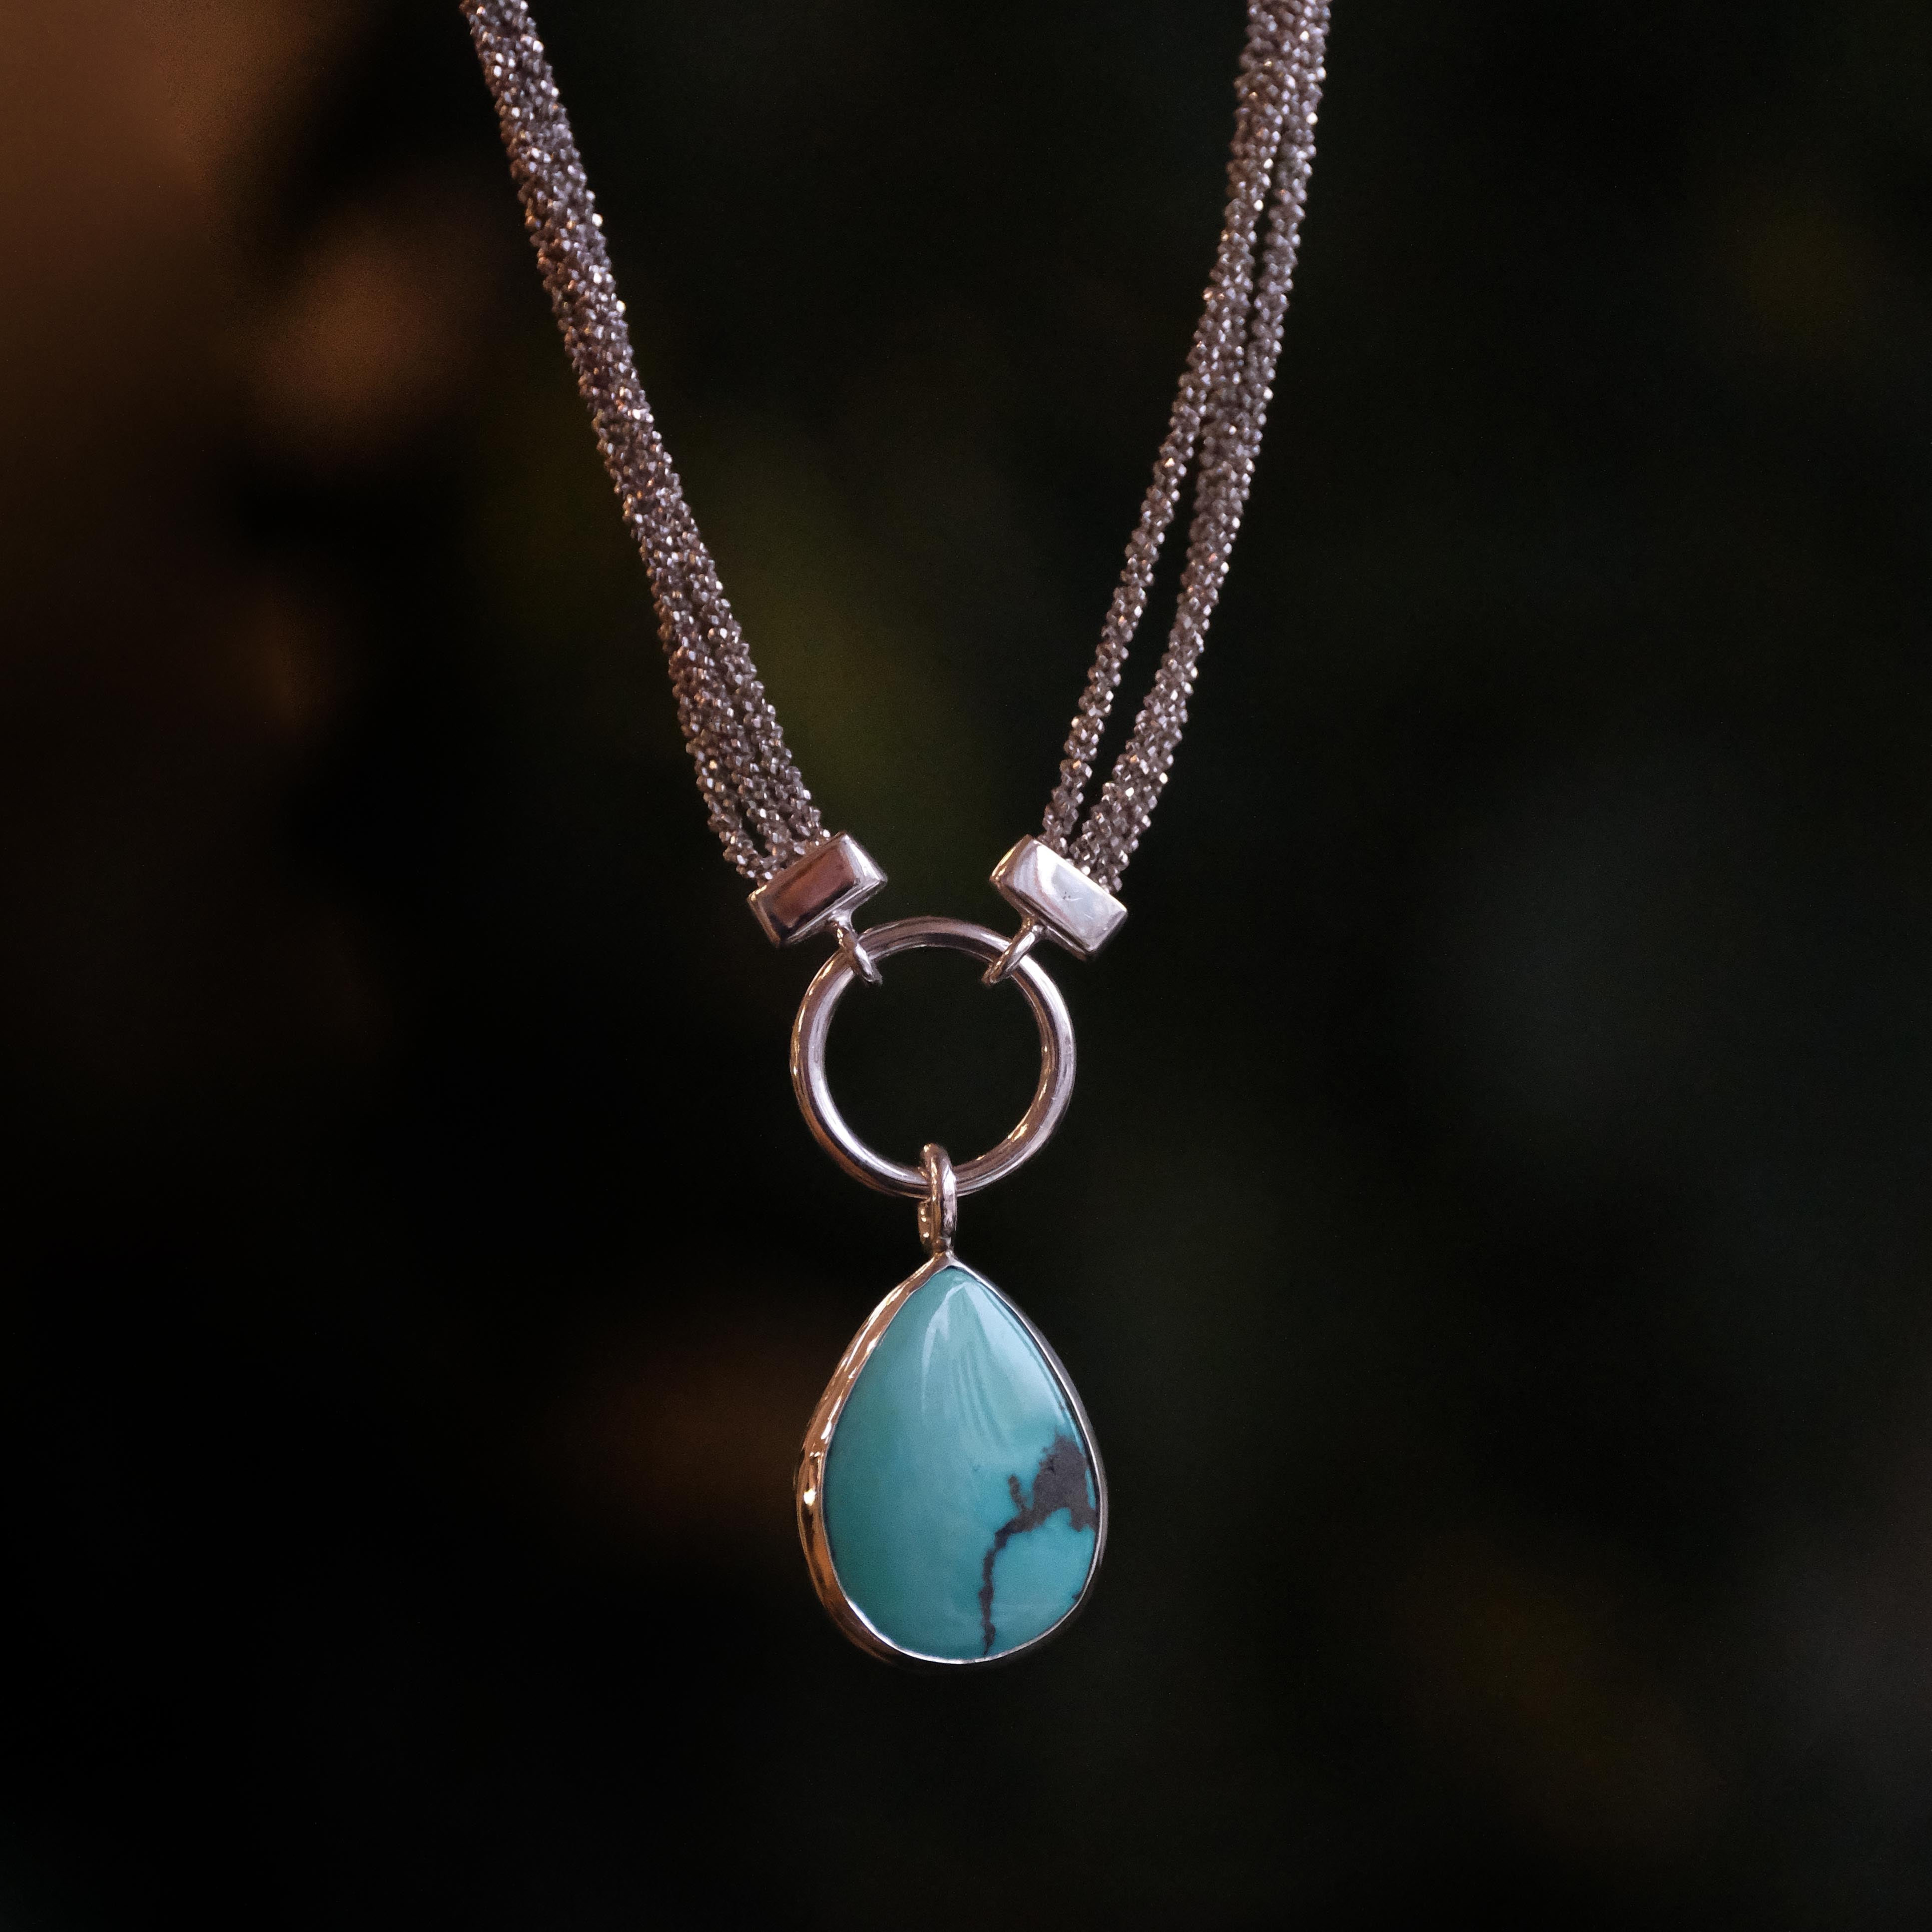 Turquoise + Sterling Malta Choker - One of a Kind